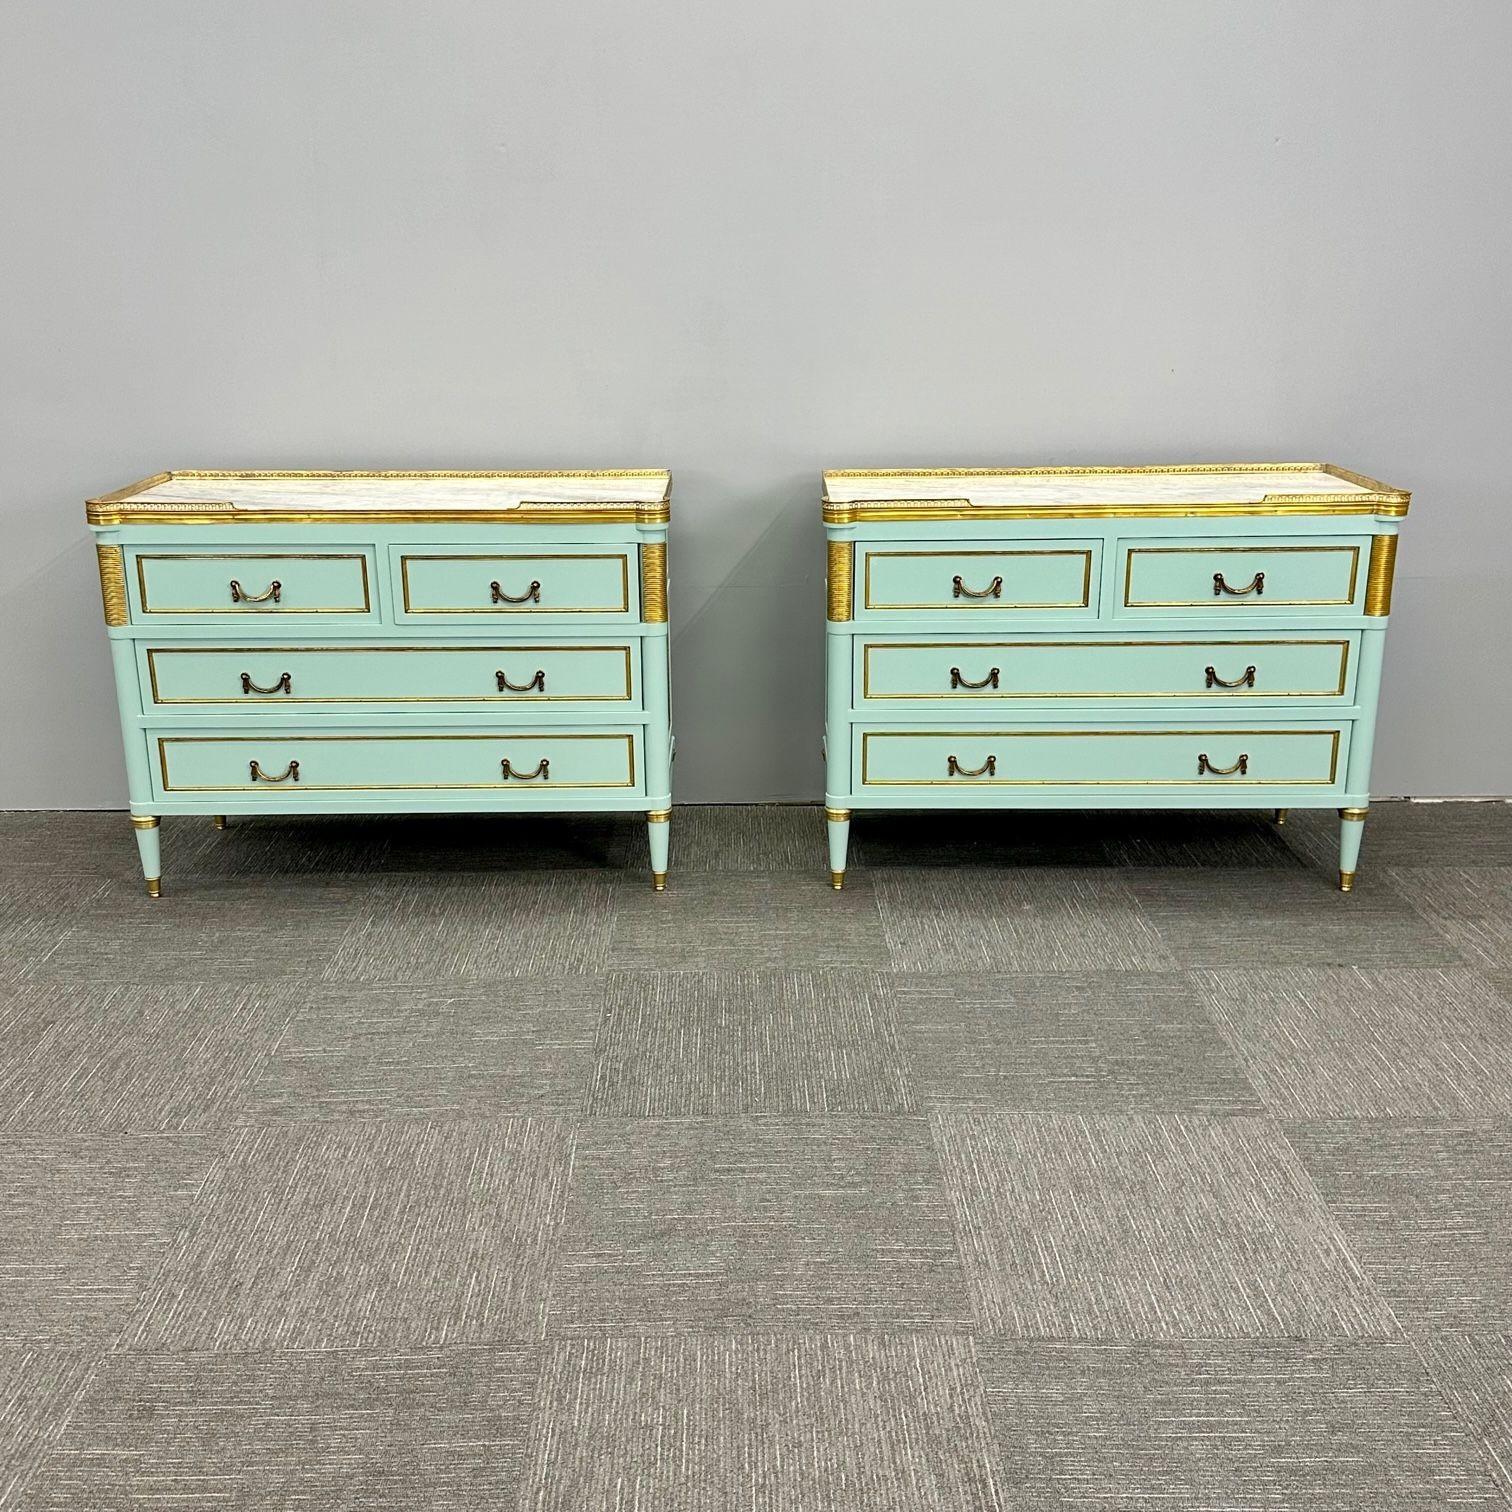 Louis XVI Hollywood Regency Jansen Style Mint Green Commodes / Nightstands
 
Pair of Maison Jansen style Hollywood Regency marble top mounted Mint Green Painted Commodes or Nightstands. This is a stunning pair of large and impressive paint